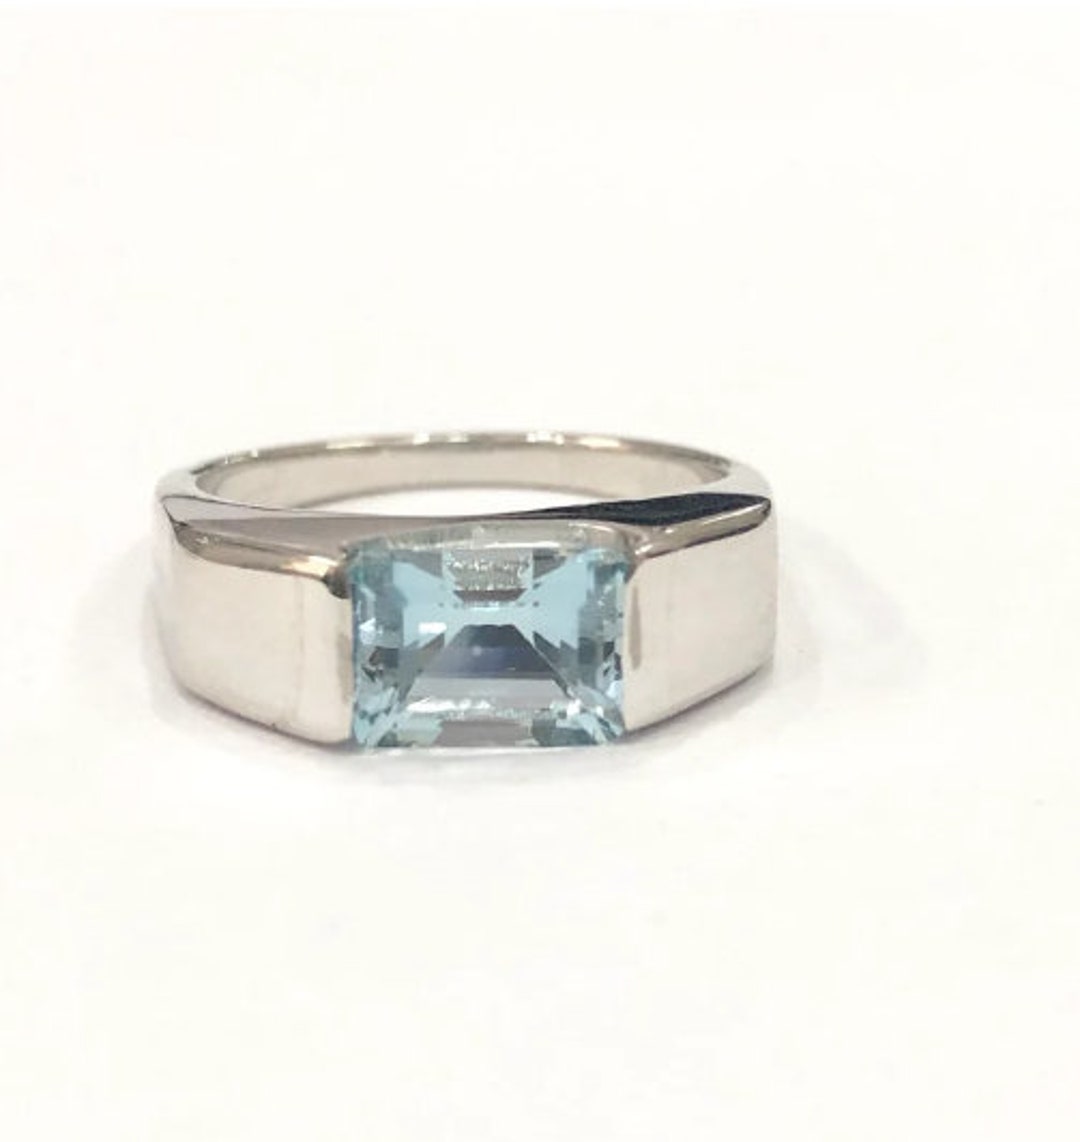 Buy 100% Natural Aquamarine 5x7mm Baguette 925 Sterling Silver Ring Men  Valentine's Day Gift for Him March Gemstone Online in India - Etsy